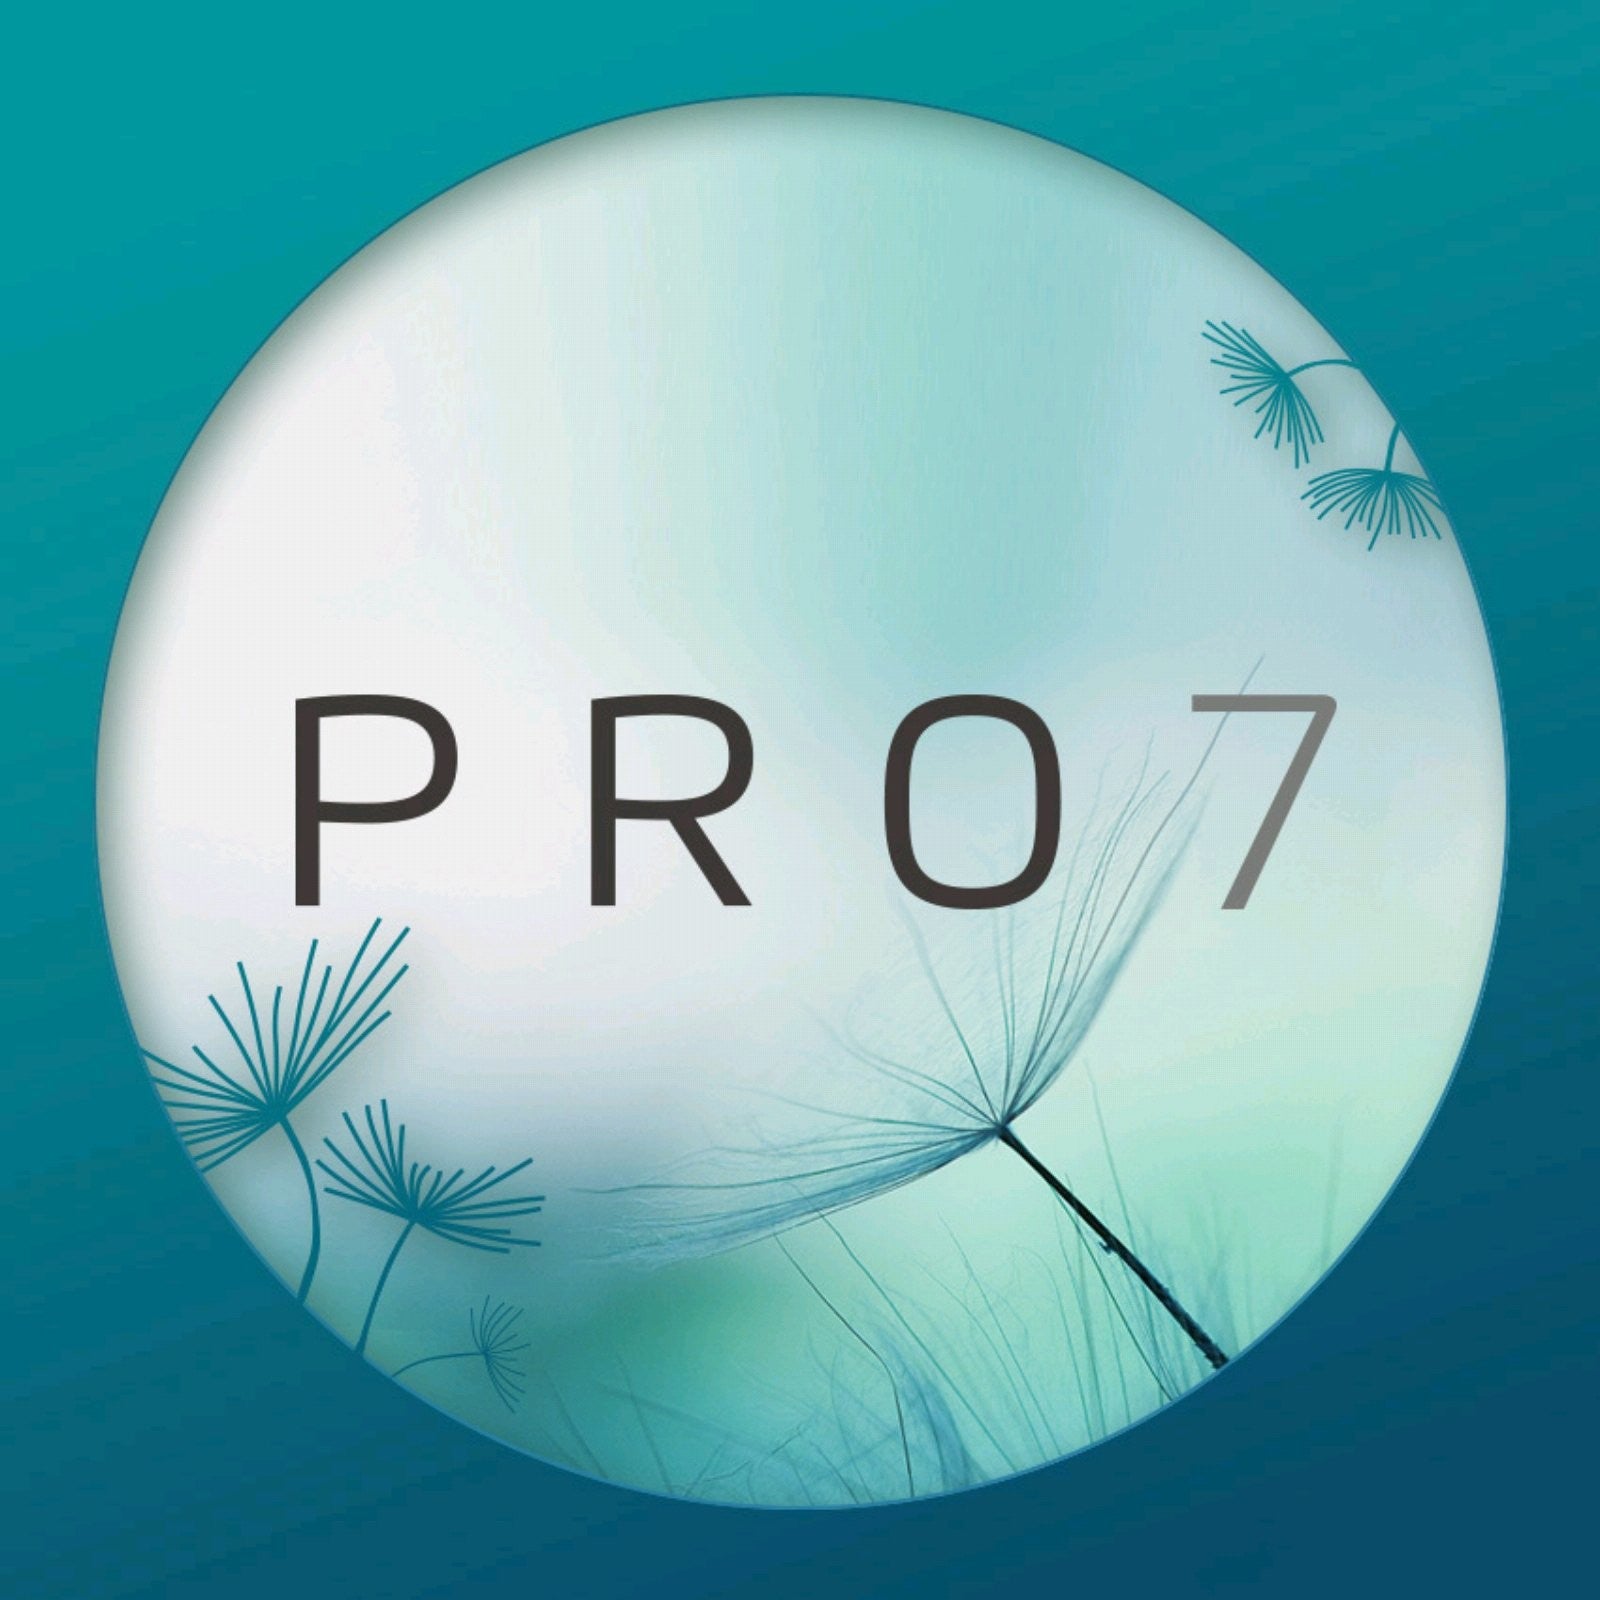 Meizu Pro 7 gets teased ahead of official announcement